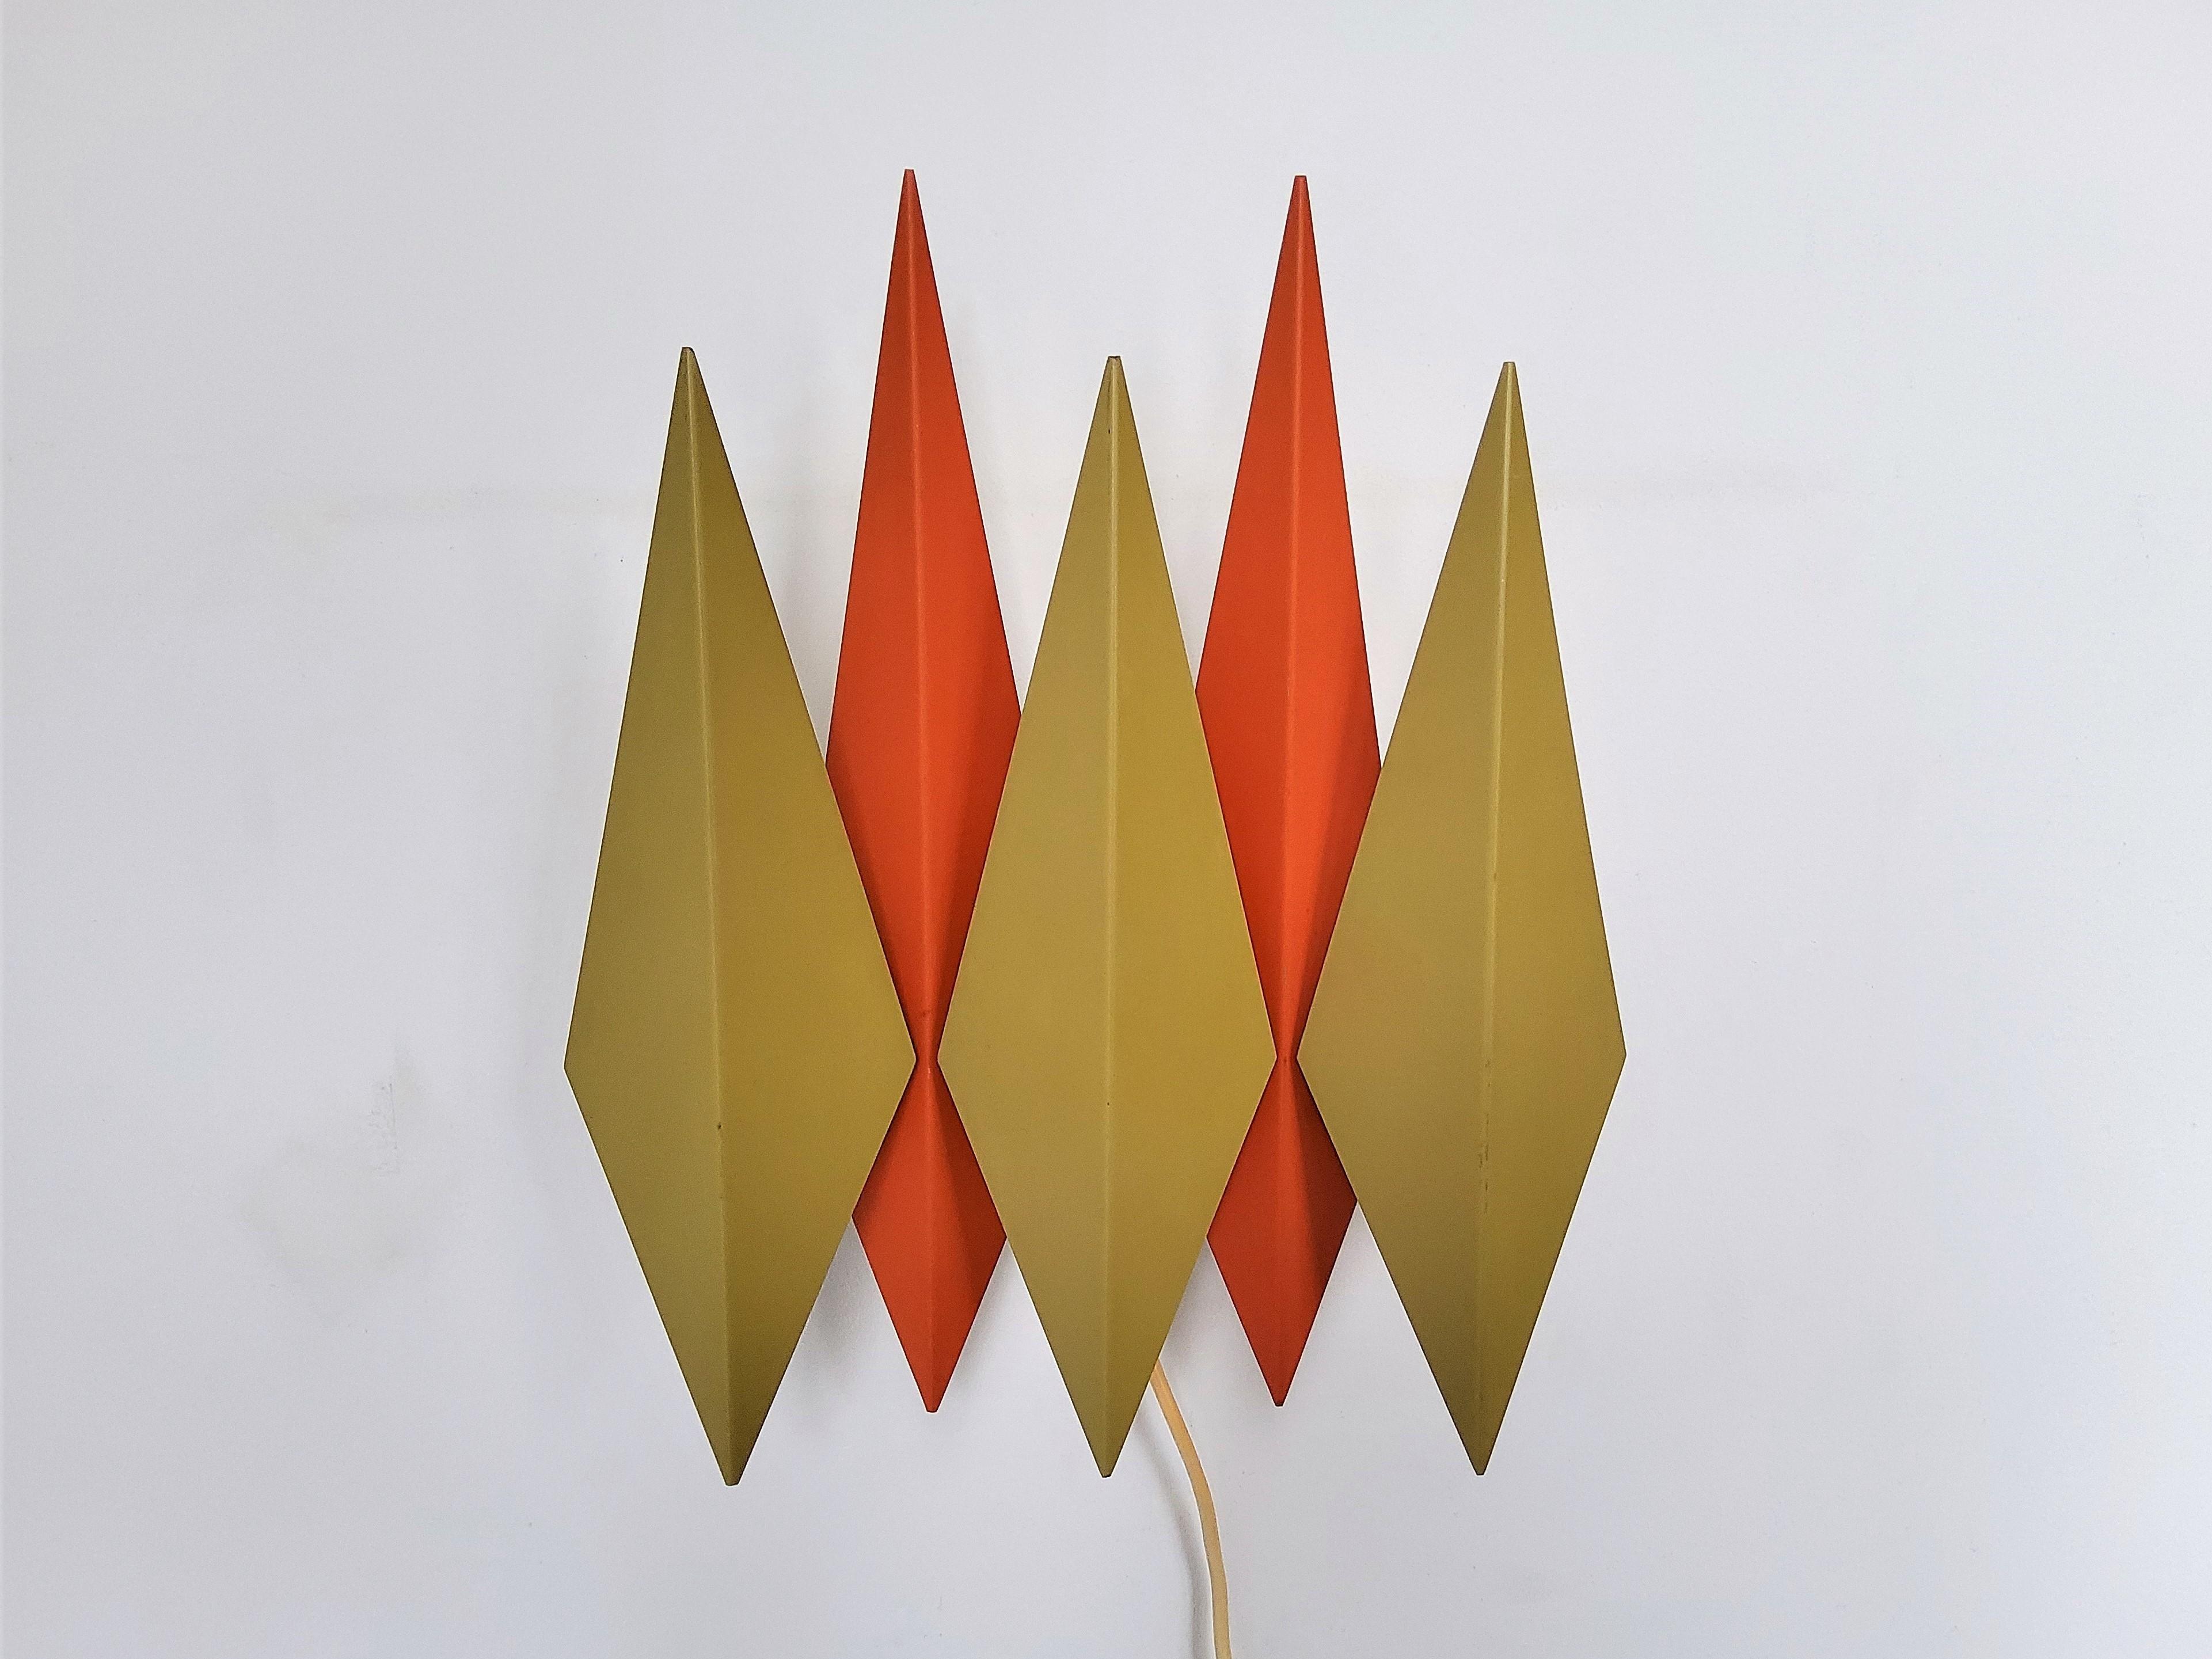 This beautiful wall lamp was designed by Svedn Aage & Holm Sørensen for Holm Sørensen & Co in Denmark in the 1960's. It is made out of 5 diamond shaped parts in an olivegreen and orange colour. A true Danish design from the 1960's. This lamp is in a